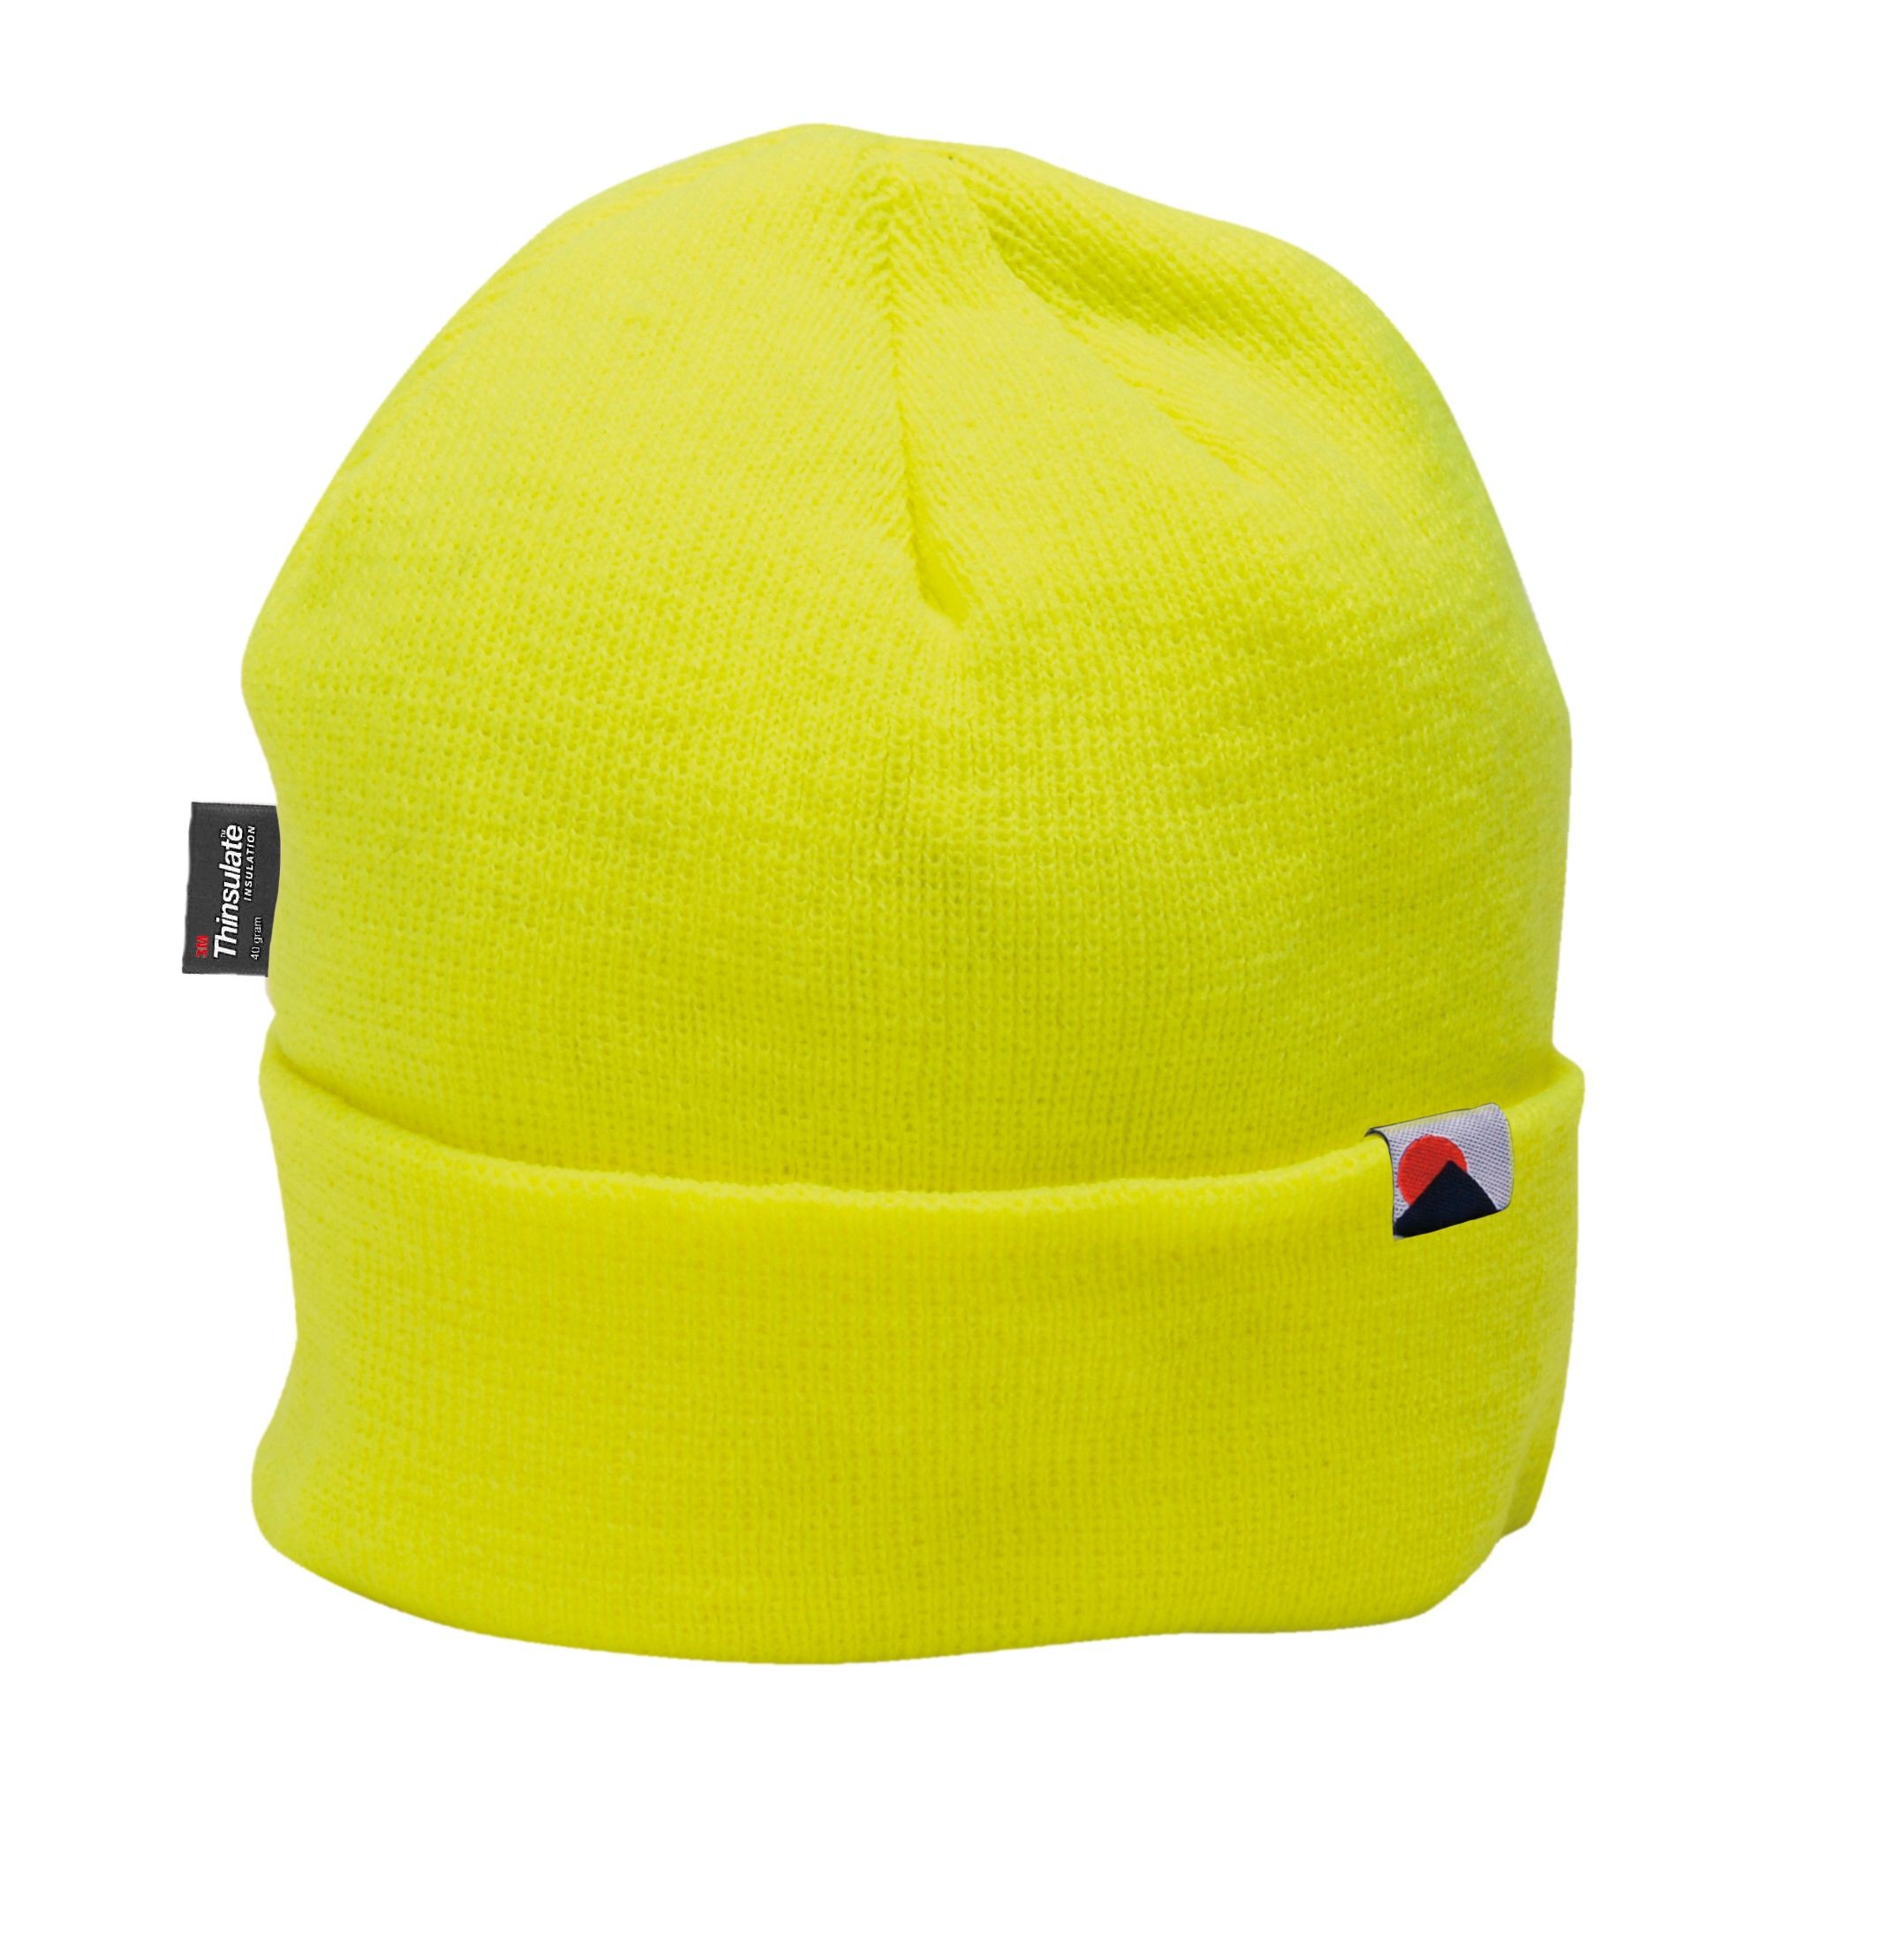 HI VIS BEANIE YELLOW OR ORANGE ACRYLIC ONE SIZE FITS MOST NEW 